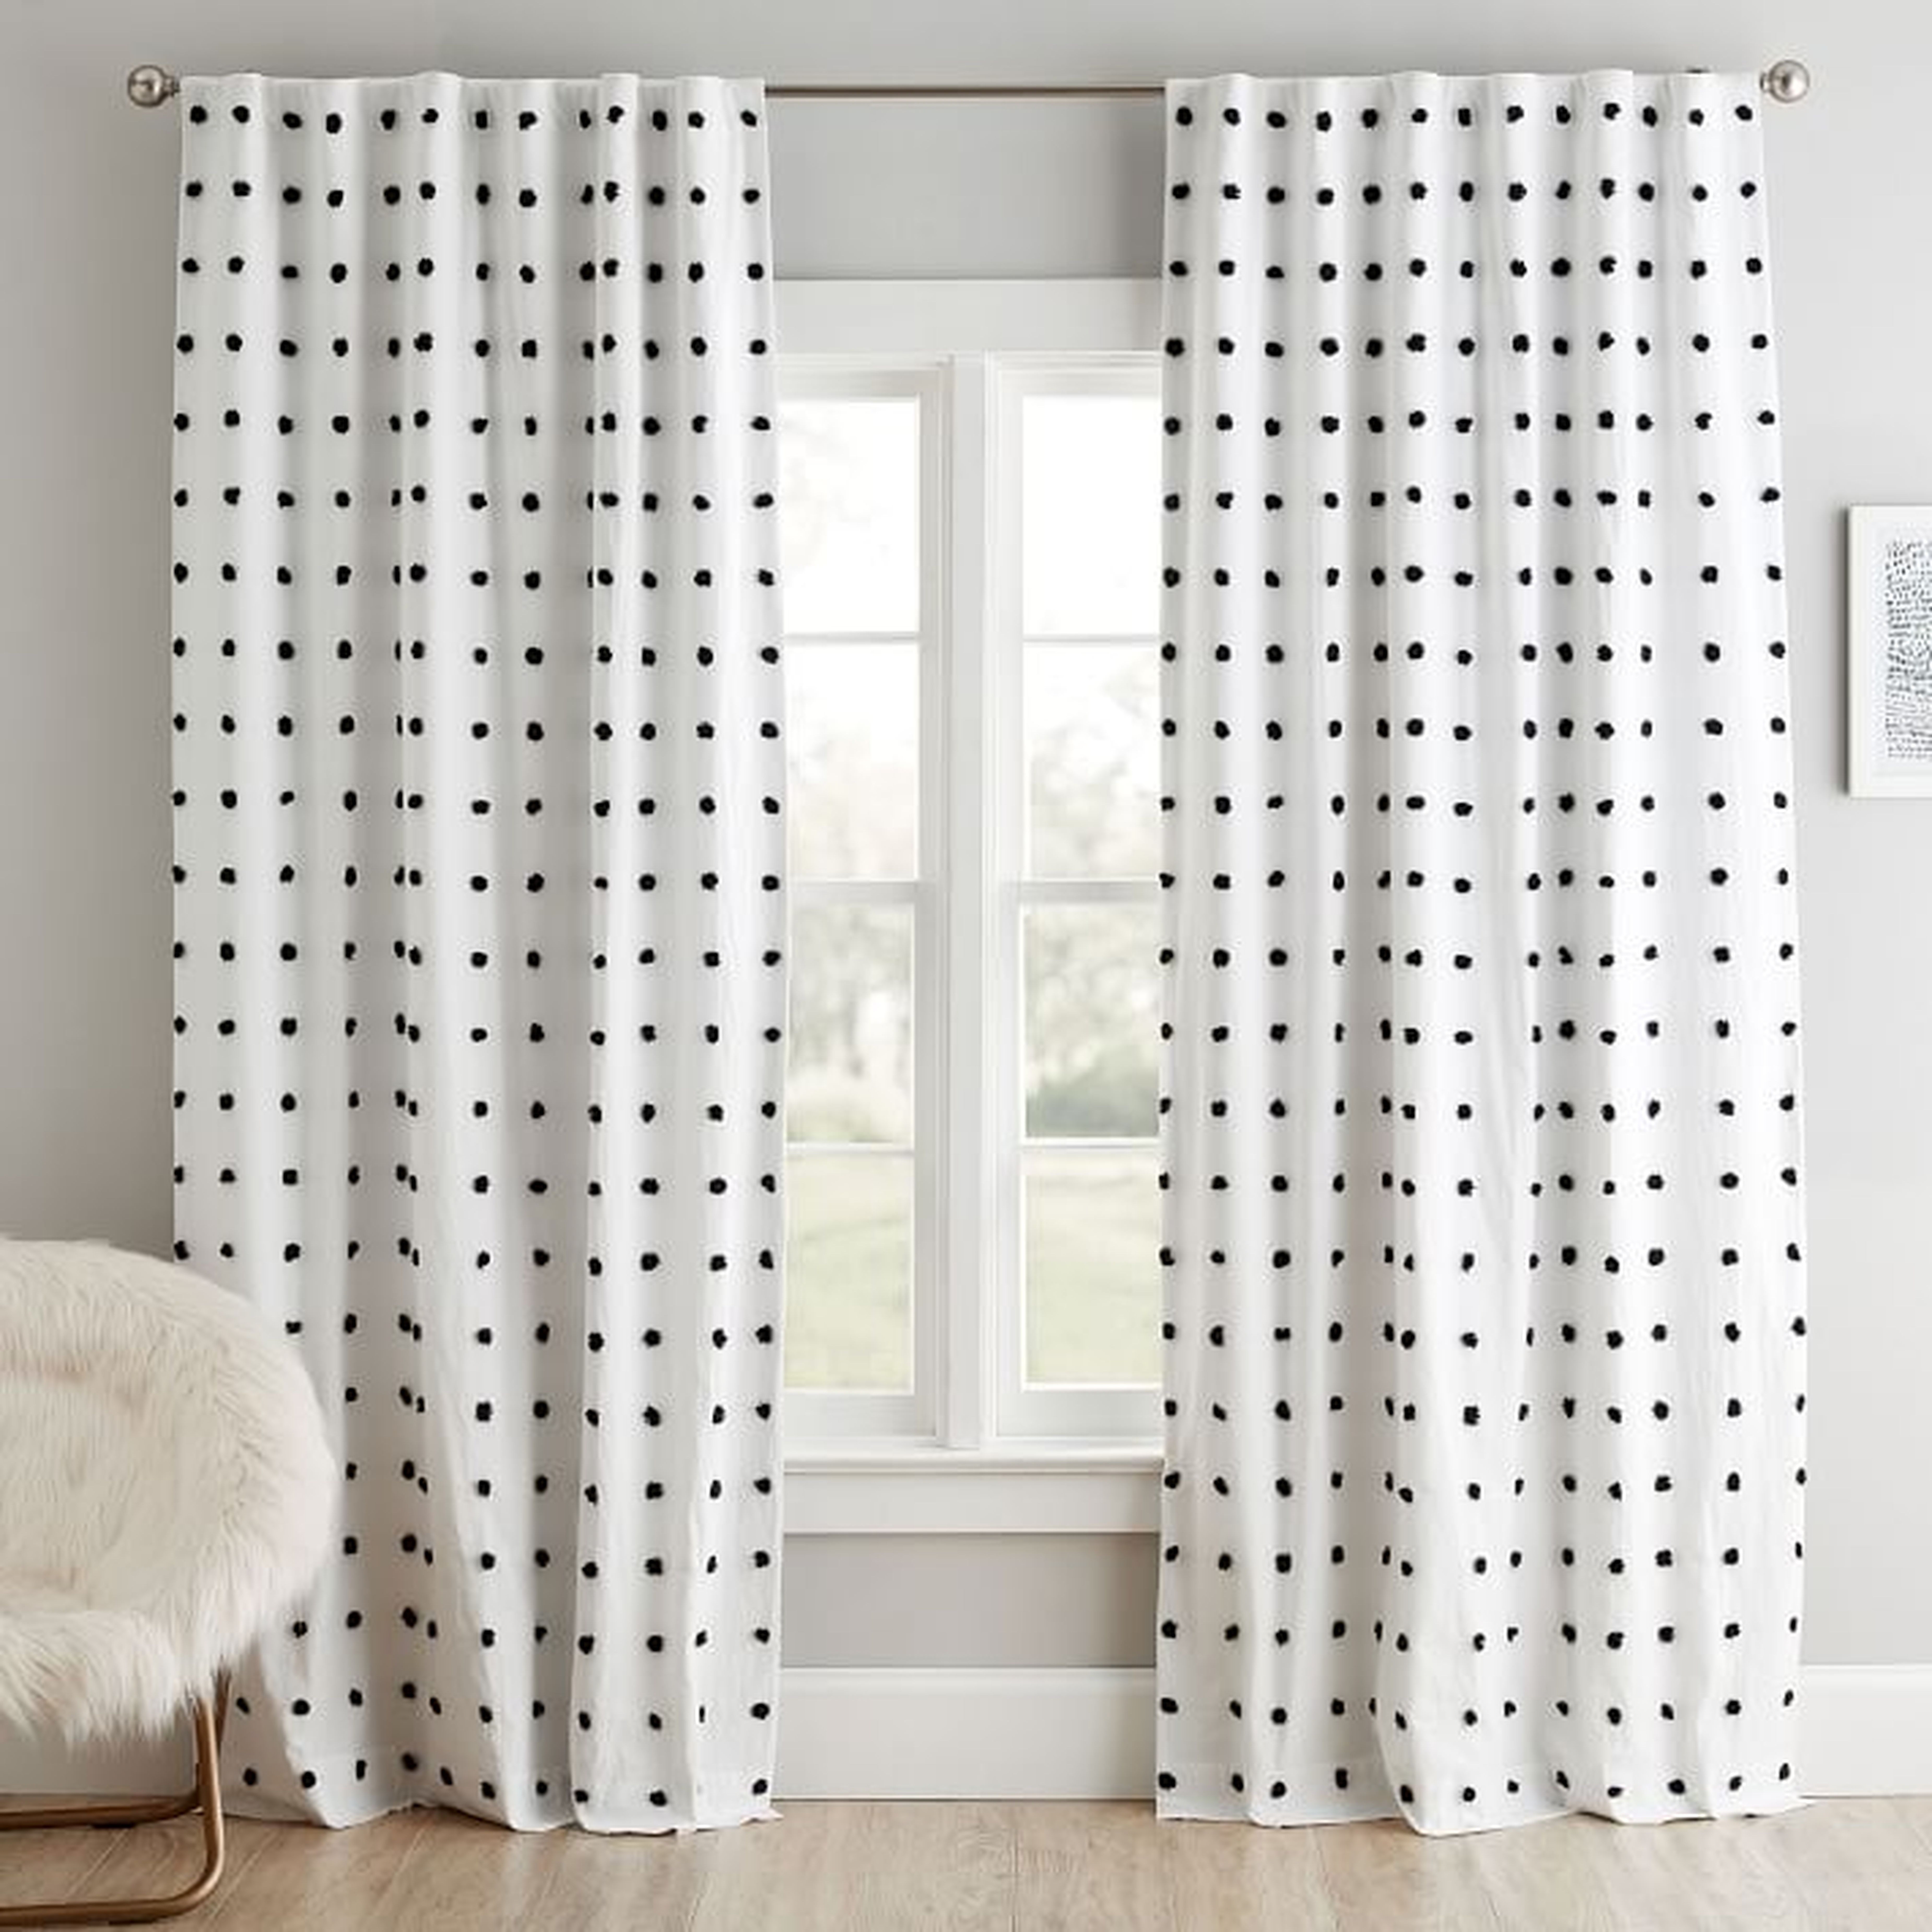 Tufted Dot Blackout Curtain Panel  set of 2 - Pottery Barn Teen